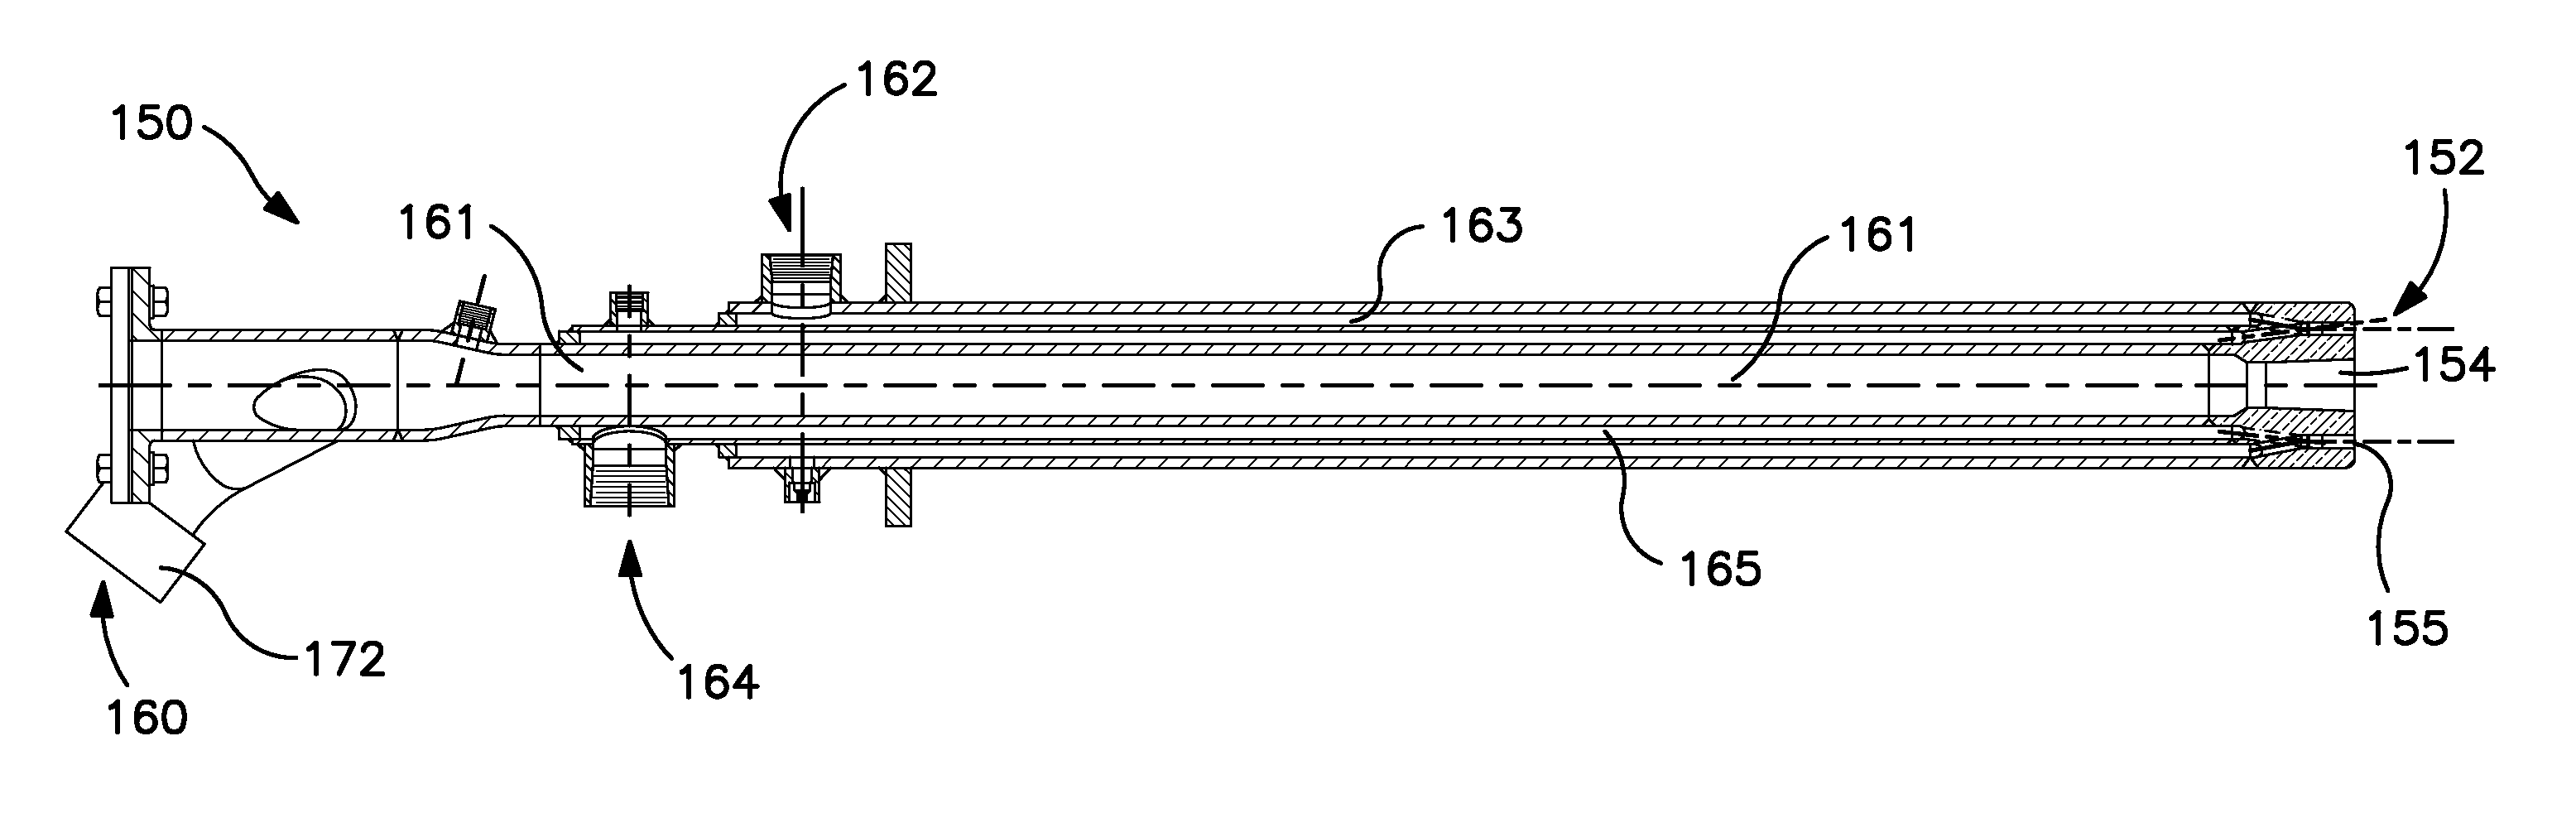 Copper anode refining system and method